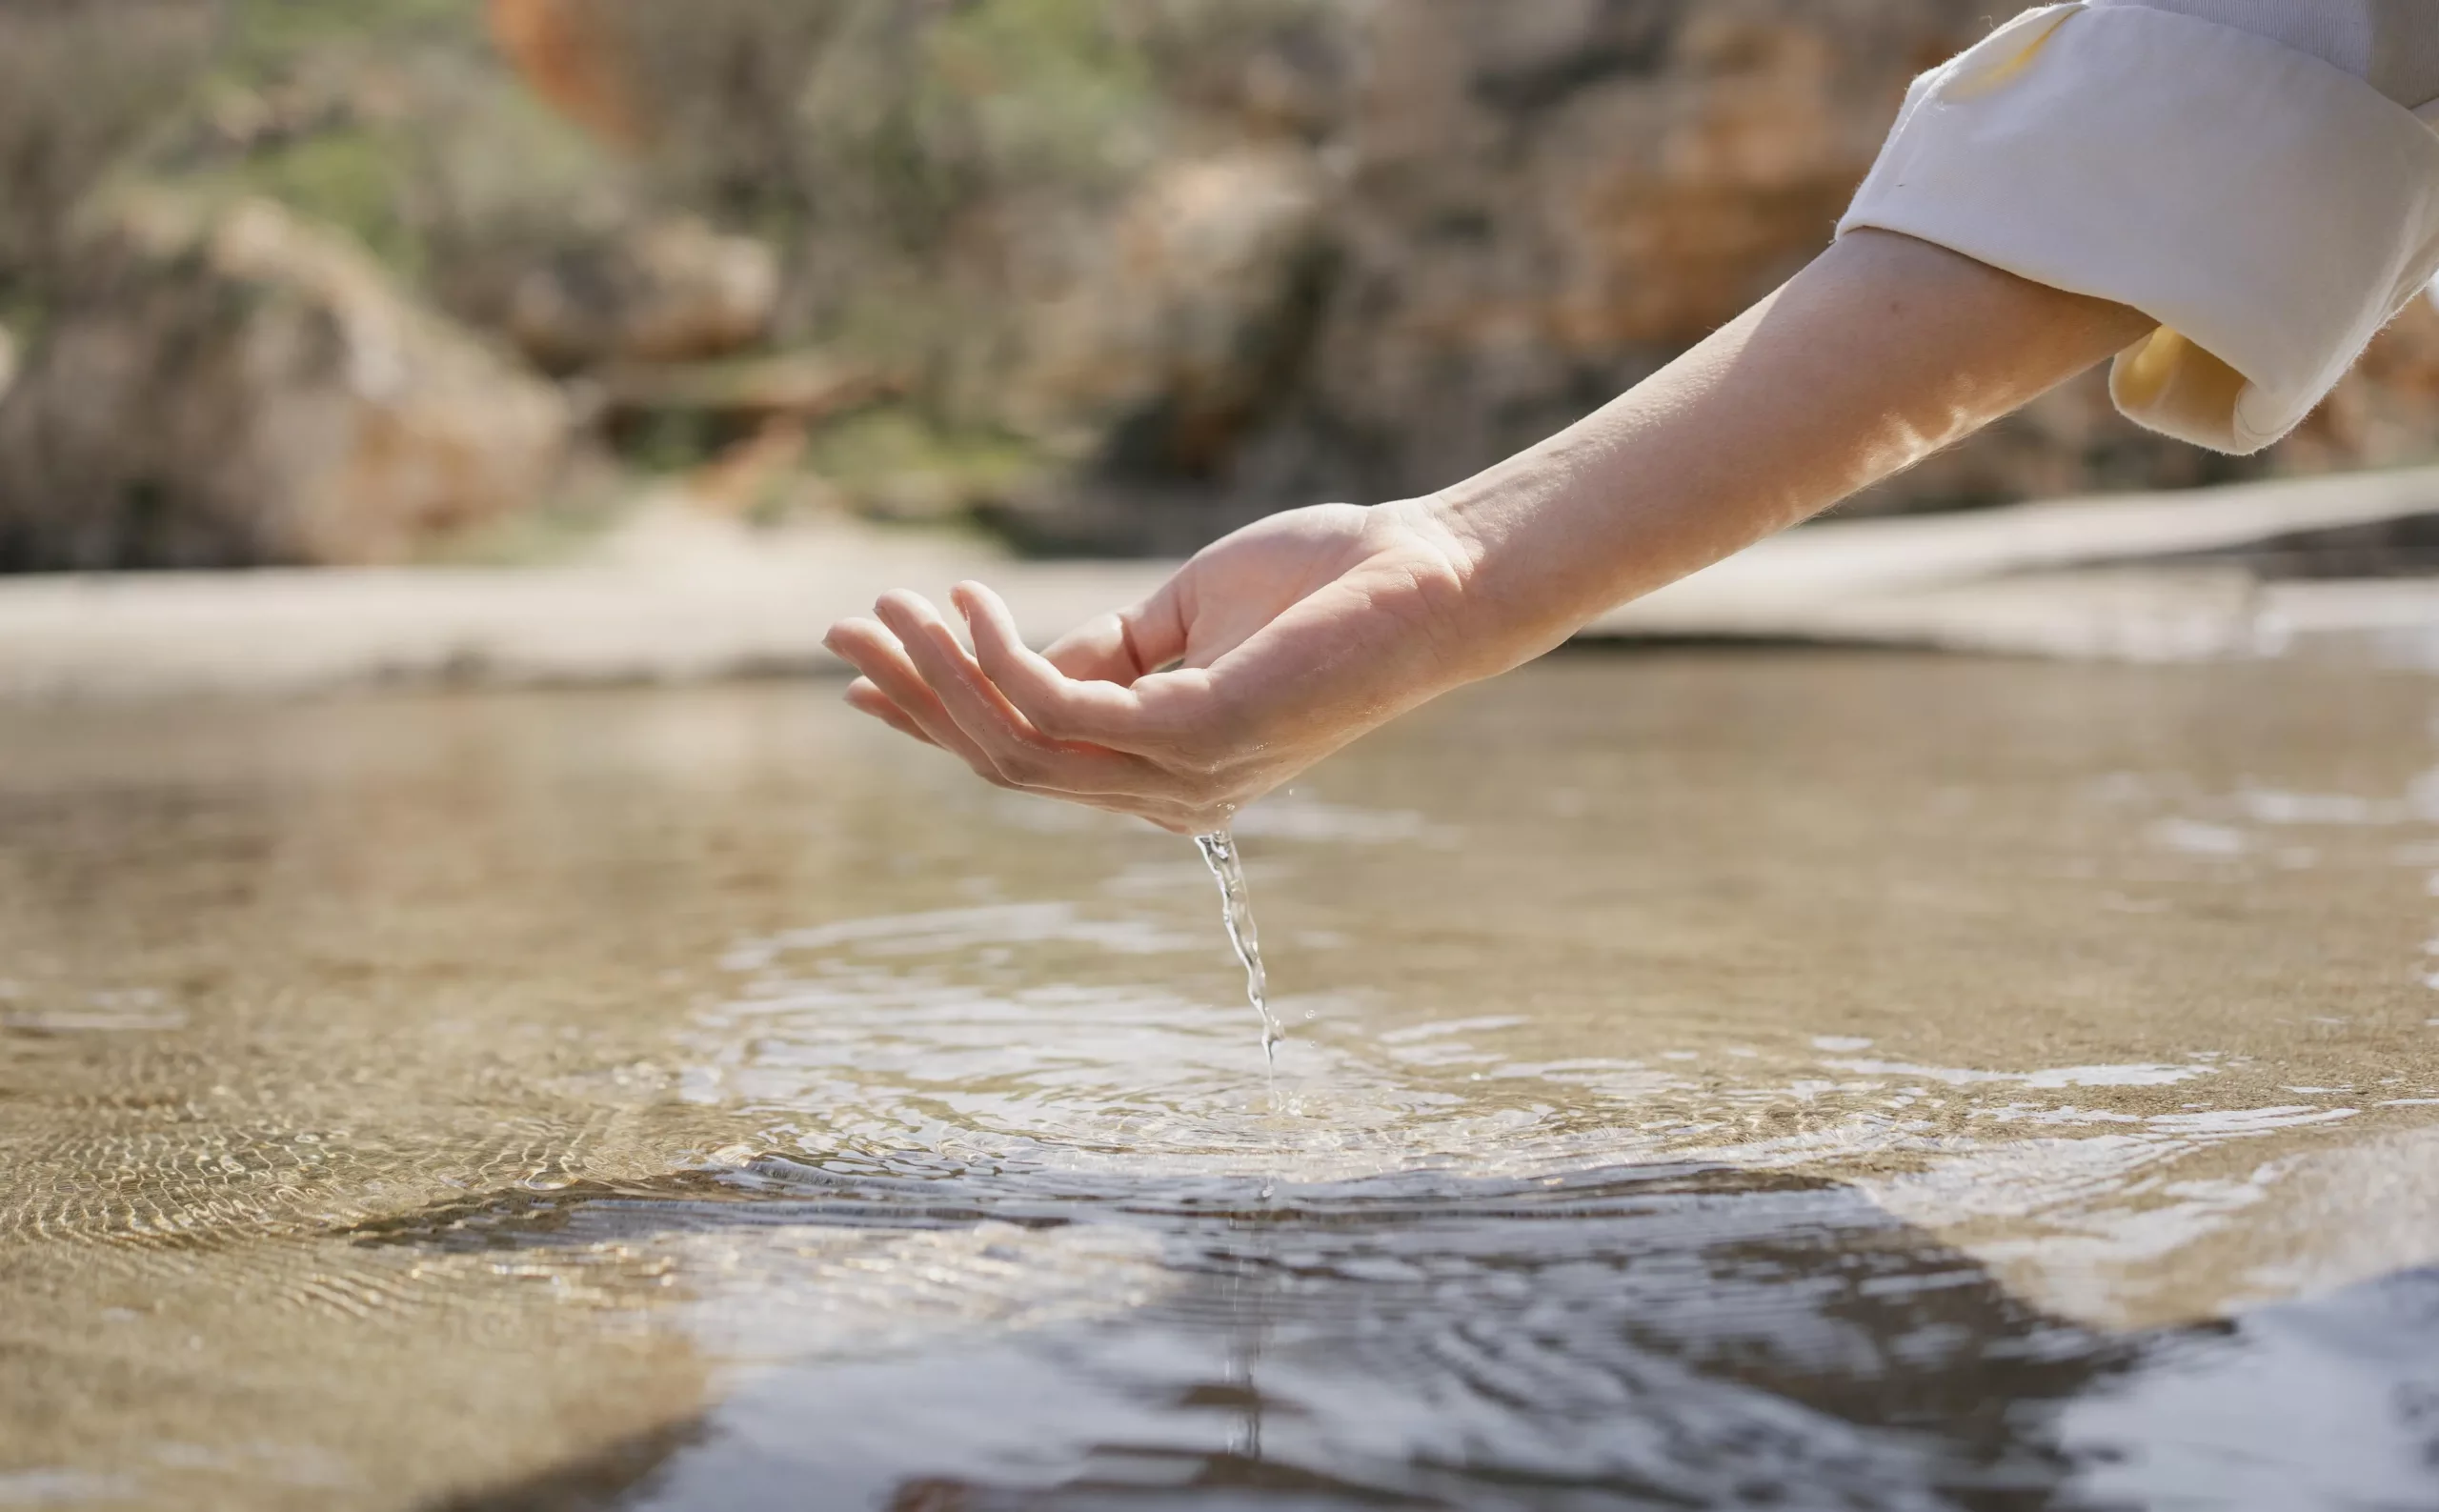 A hand checking water in an open surrounding